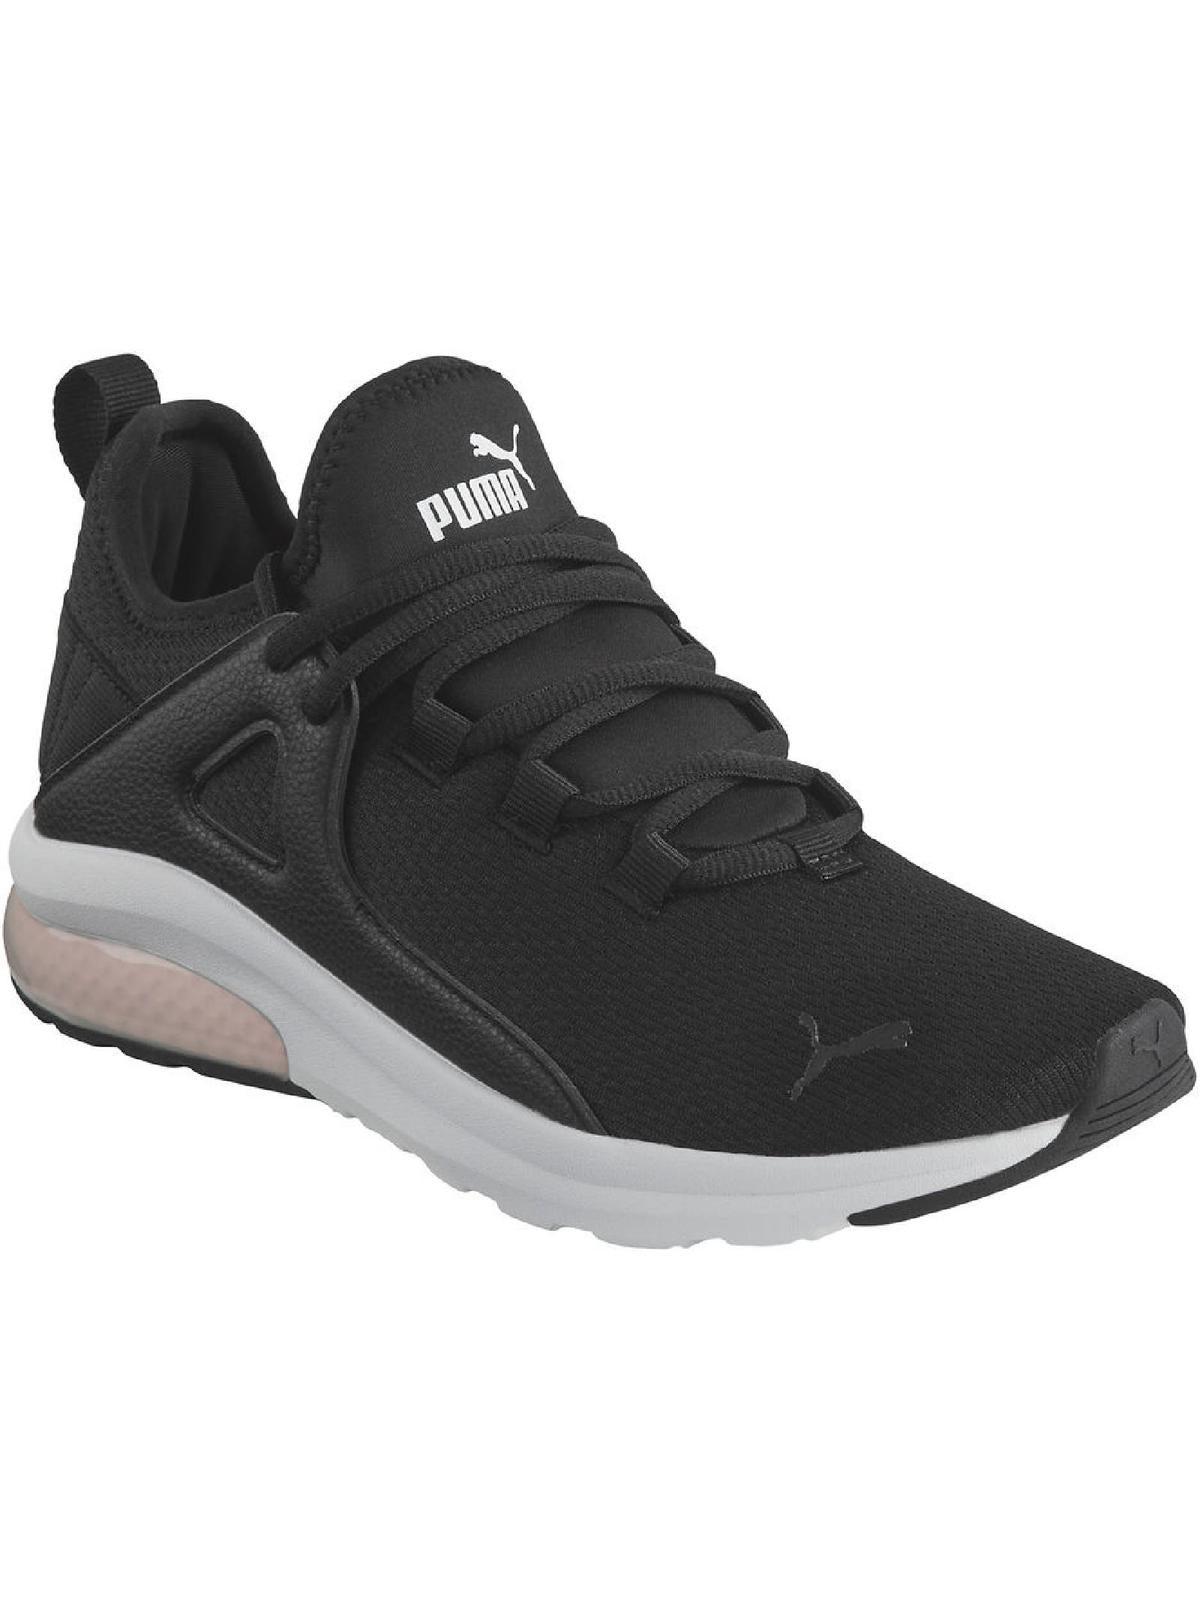 PUMA Electron 2.0 Workout Gym Running Shoes in Black | Lyst